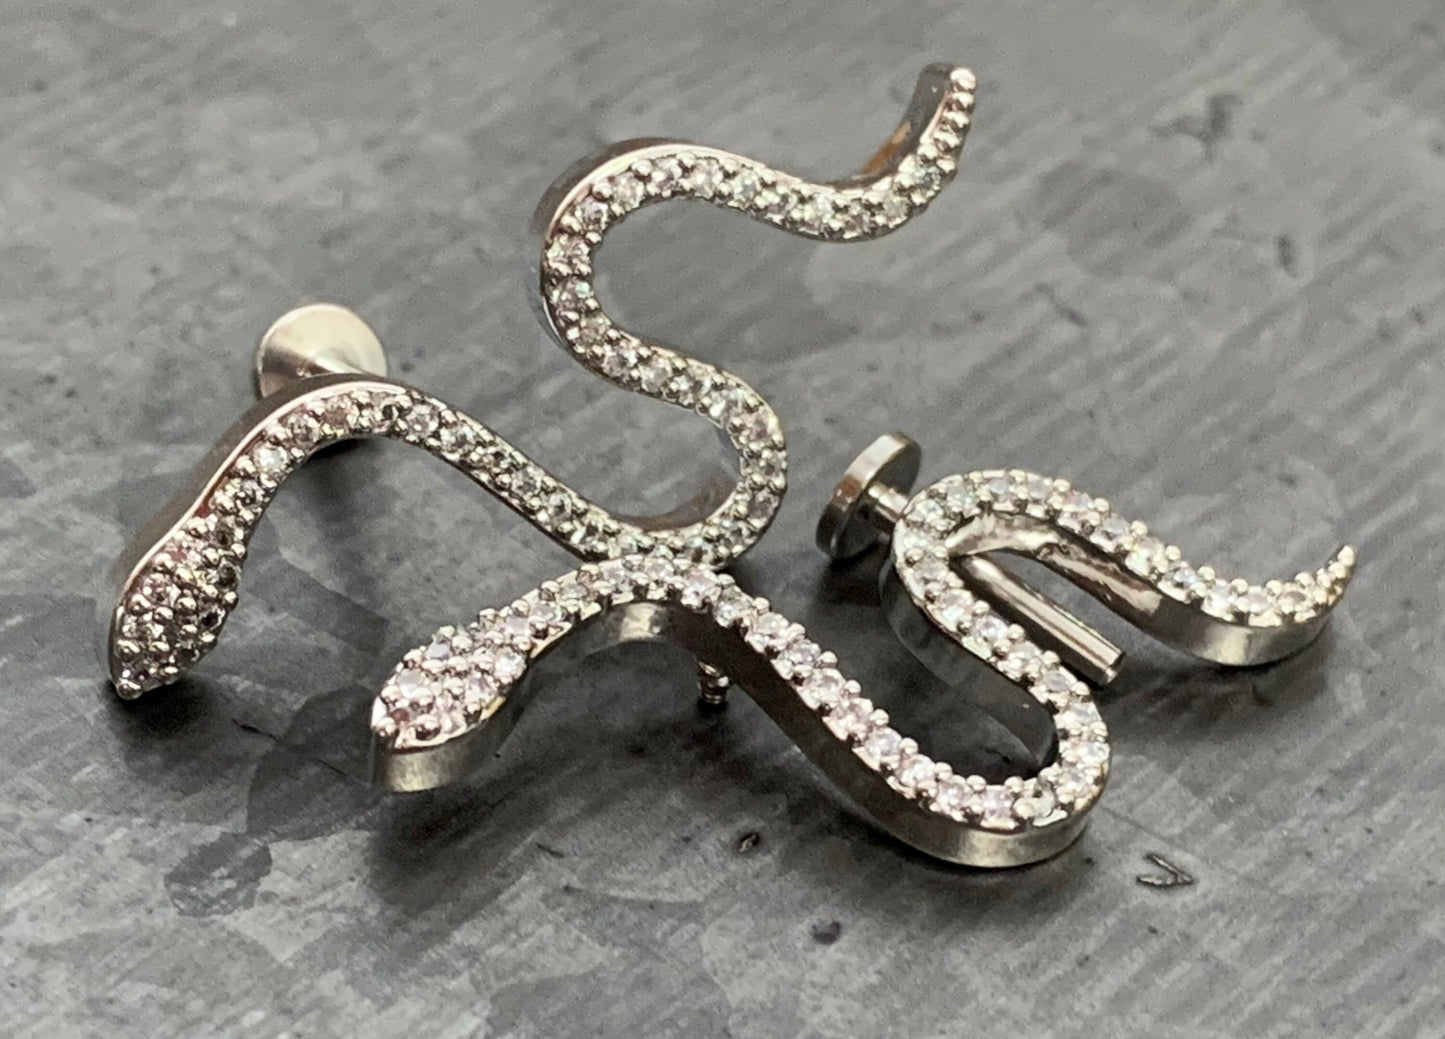 1 Piece Unique CZ Paved Steel Snake 16g Internally Threaded Labret - Sliver, Gold and Aurora Borealis available!